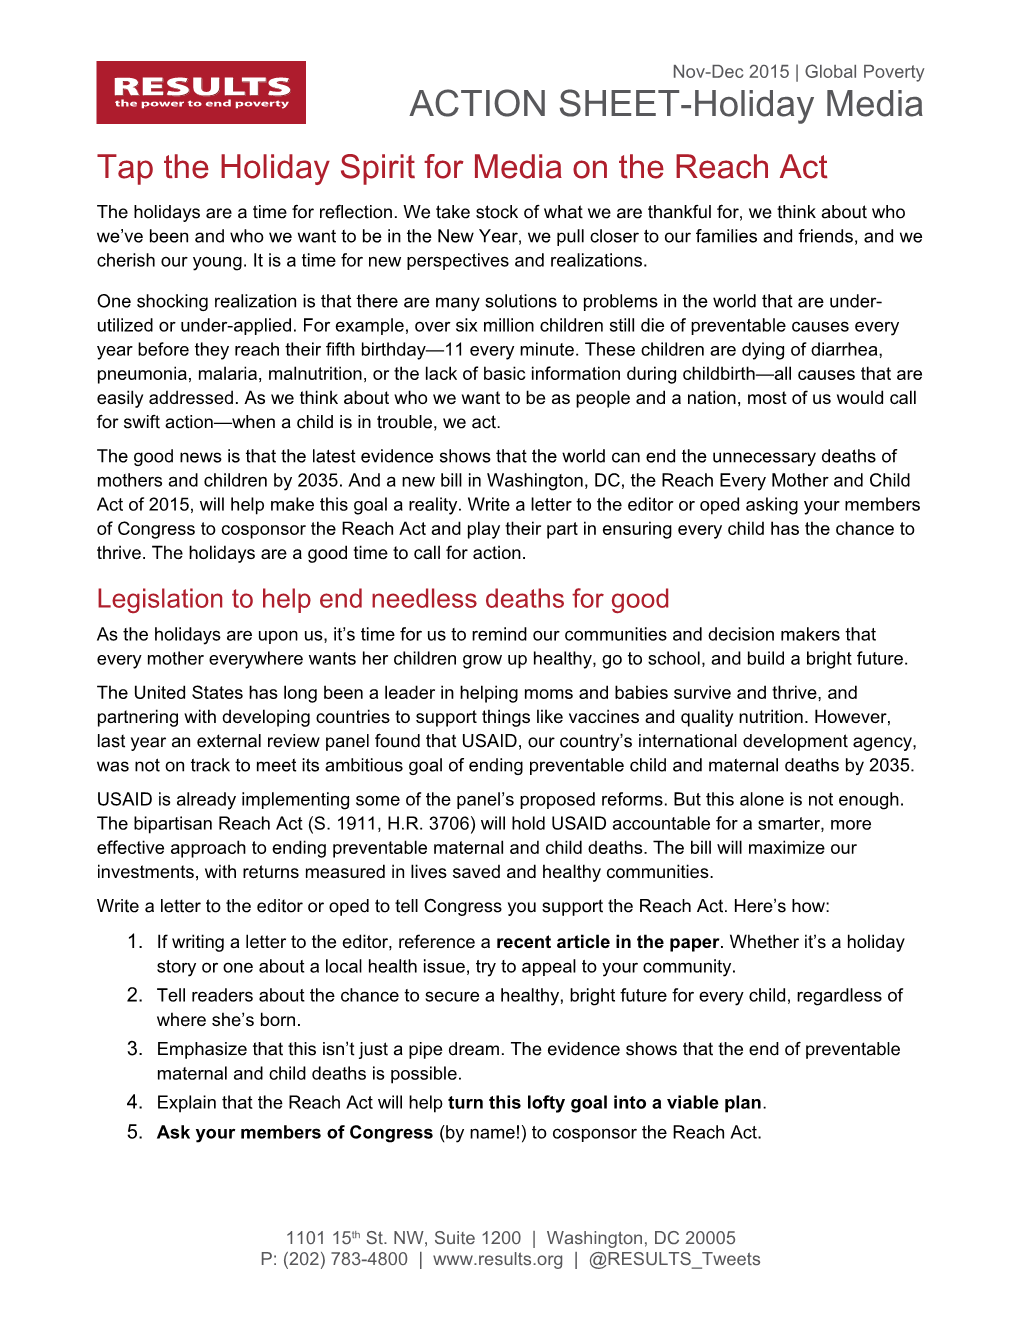 Tap the Holiday Spirit for Media on the Reach Act